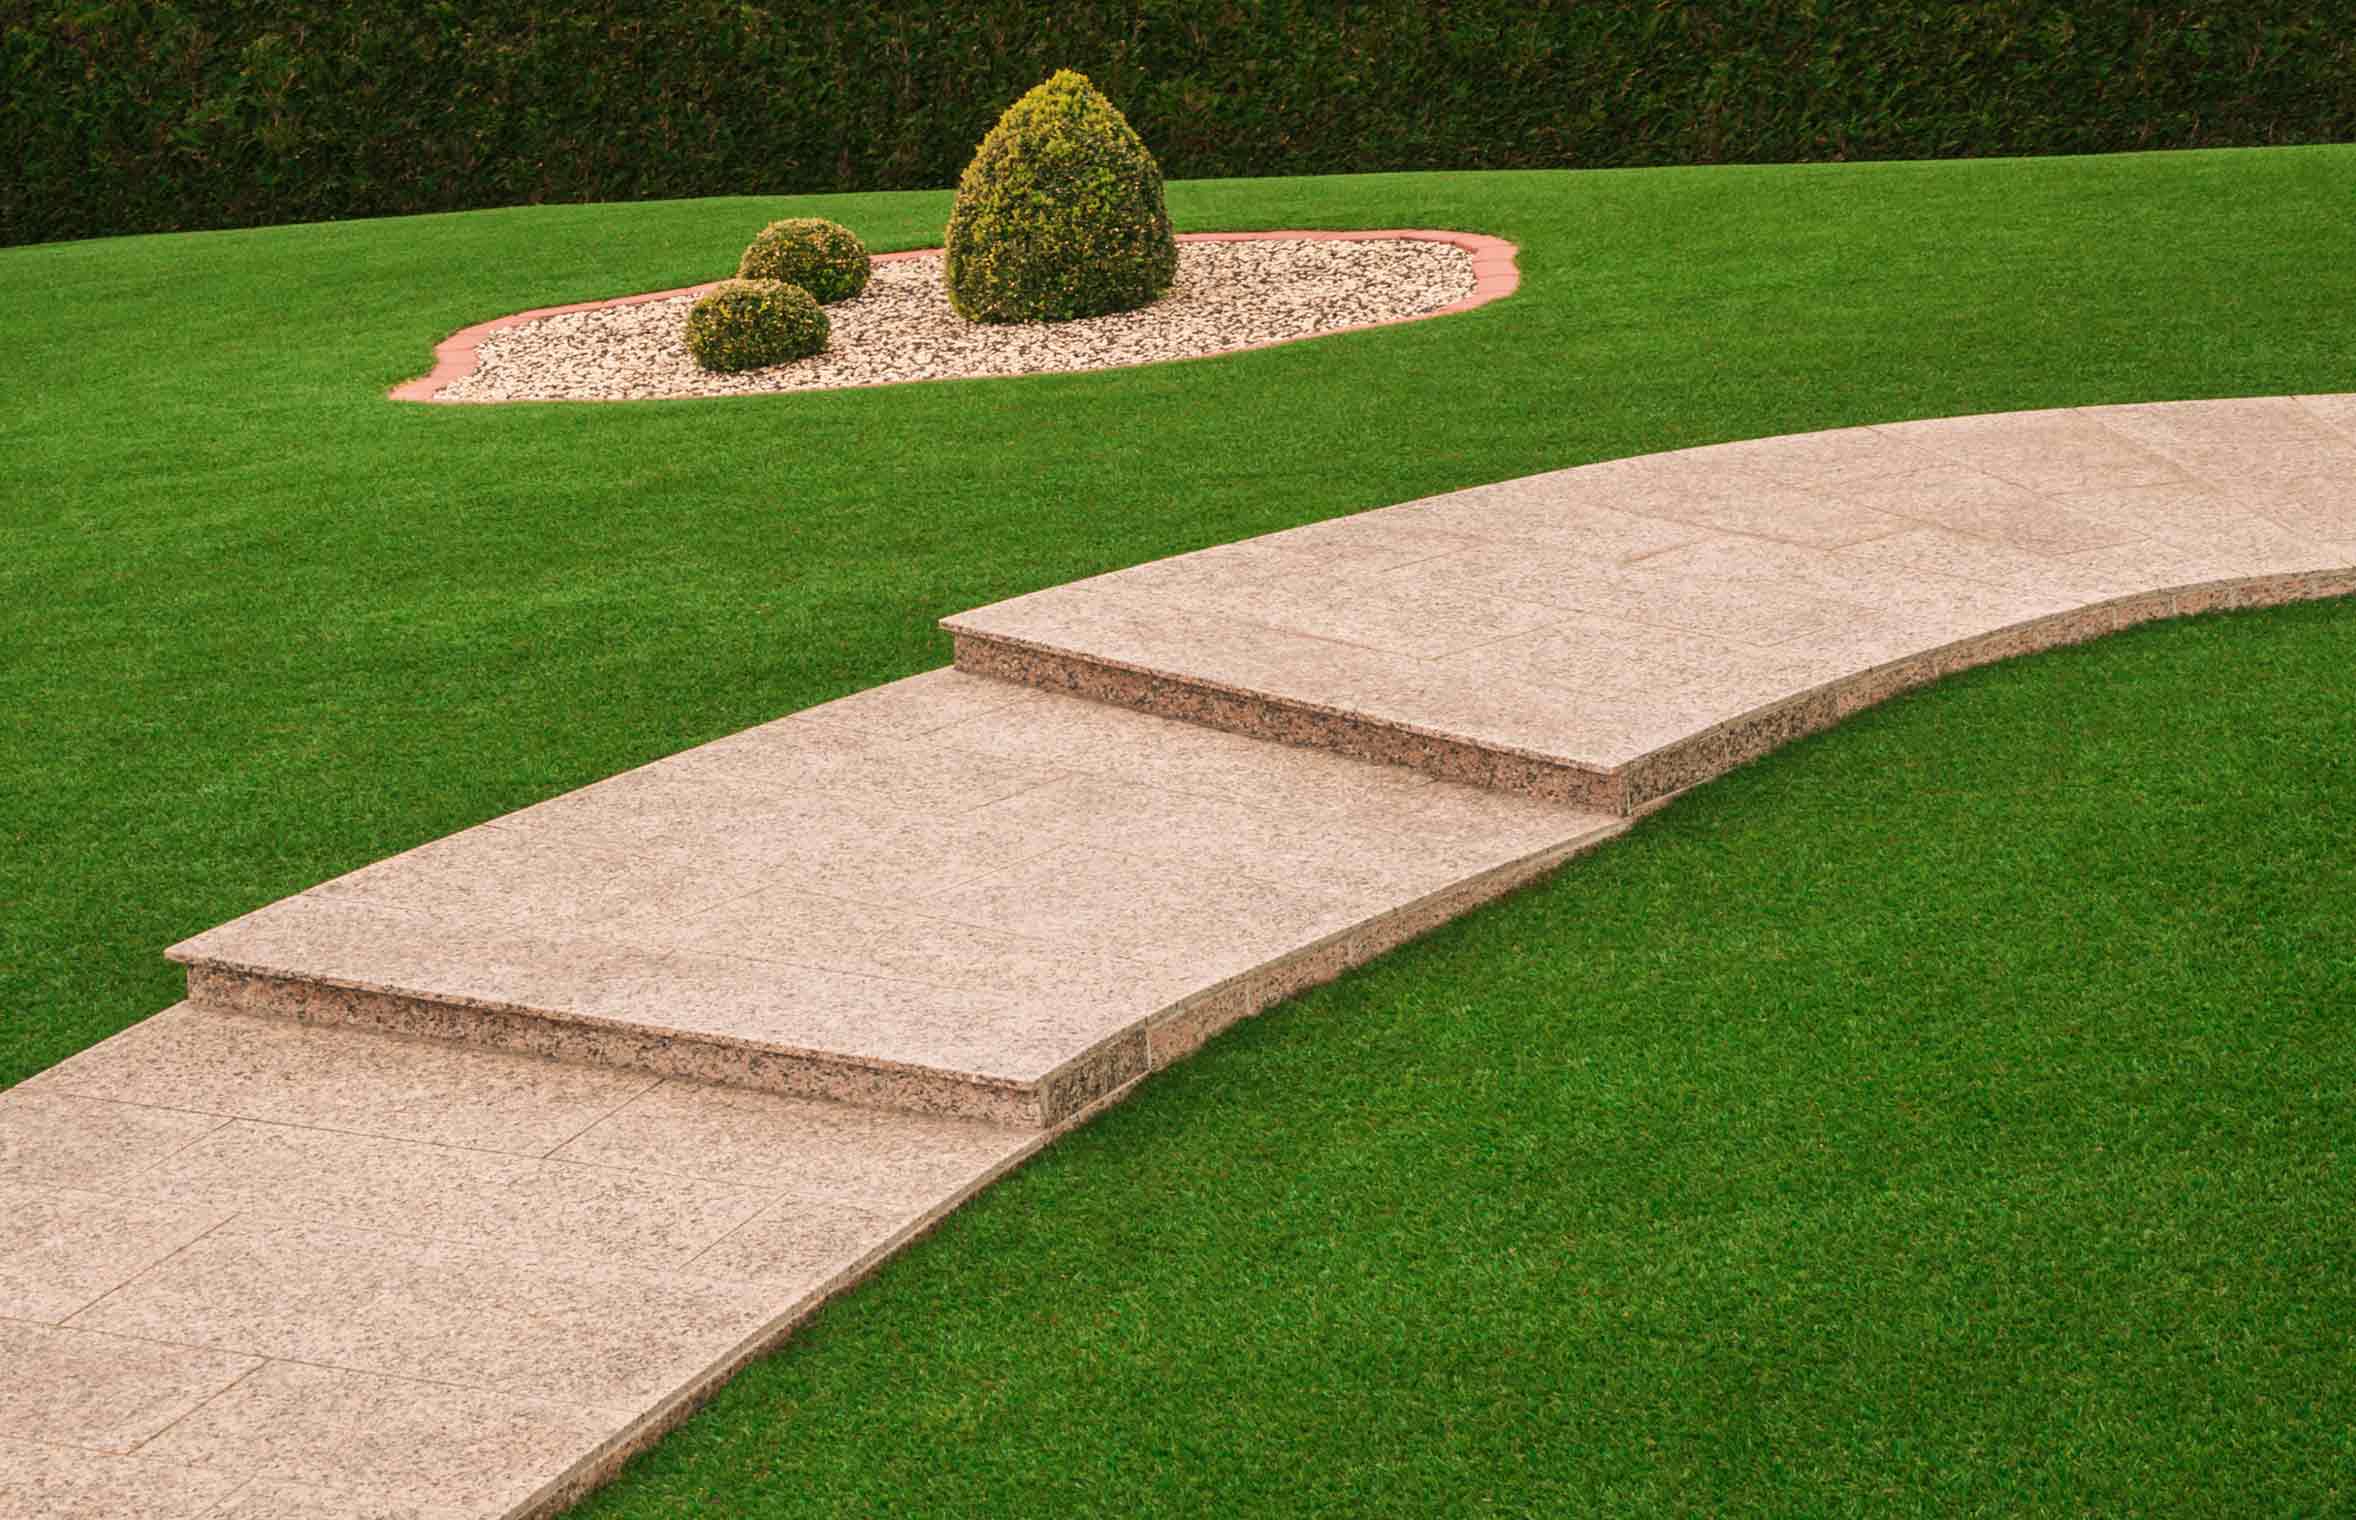 stone path walkway and artificial grass lawn